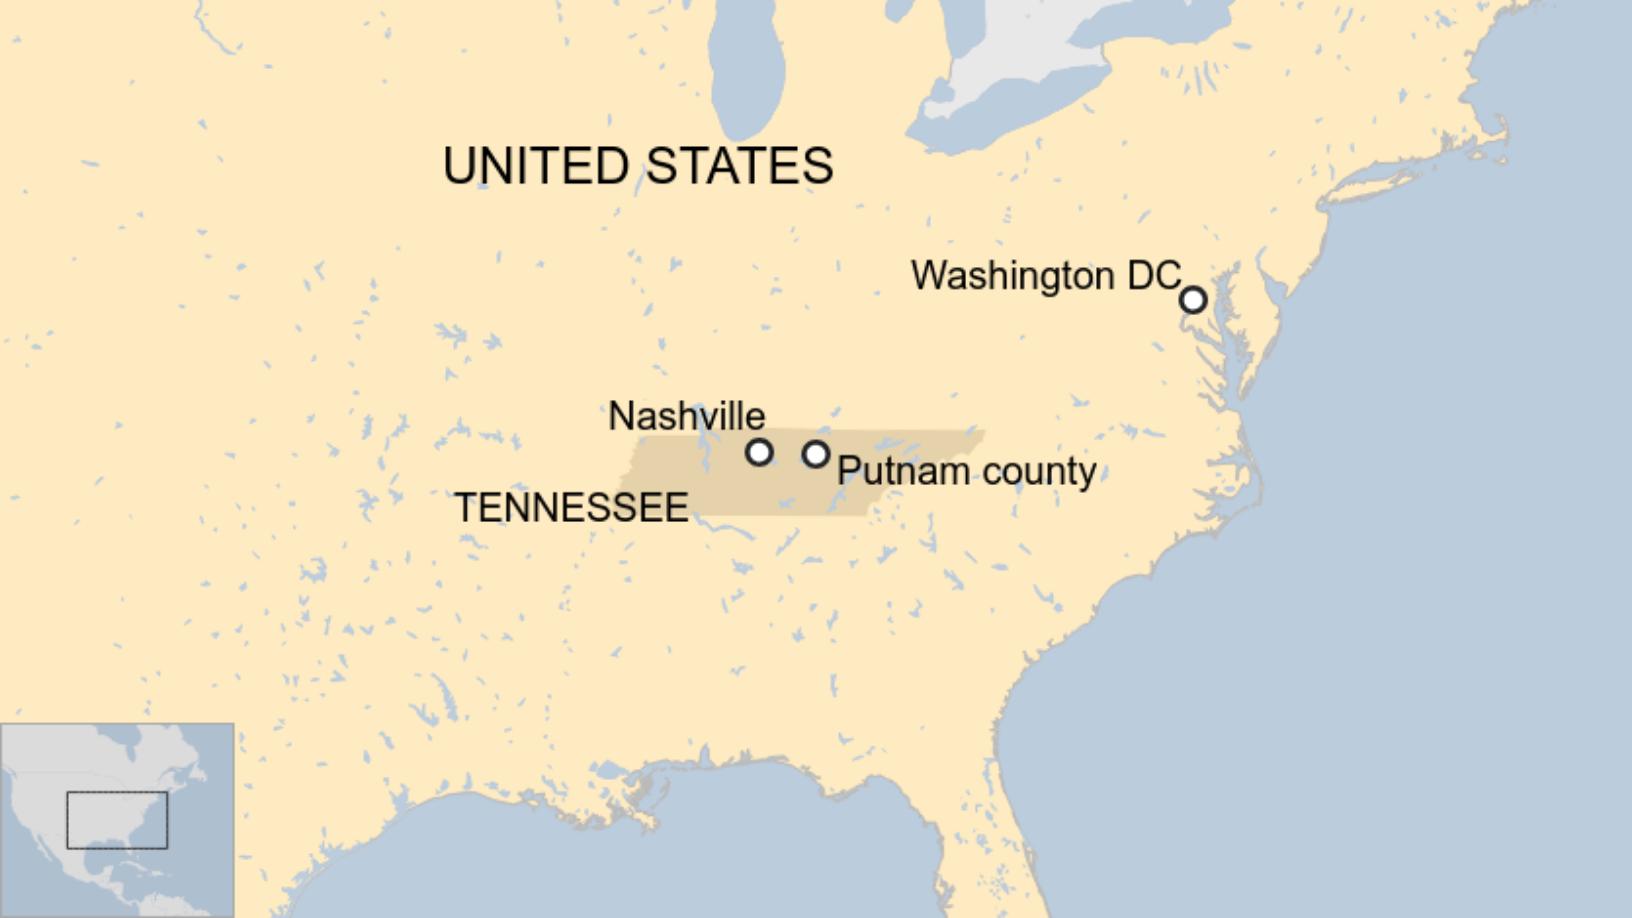 Map: Map of the USA with Tennessee, Nashville and Putnam county highlighted